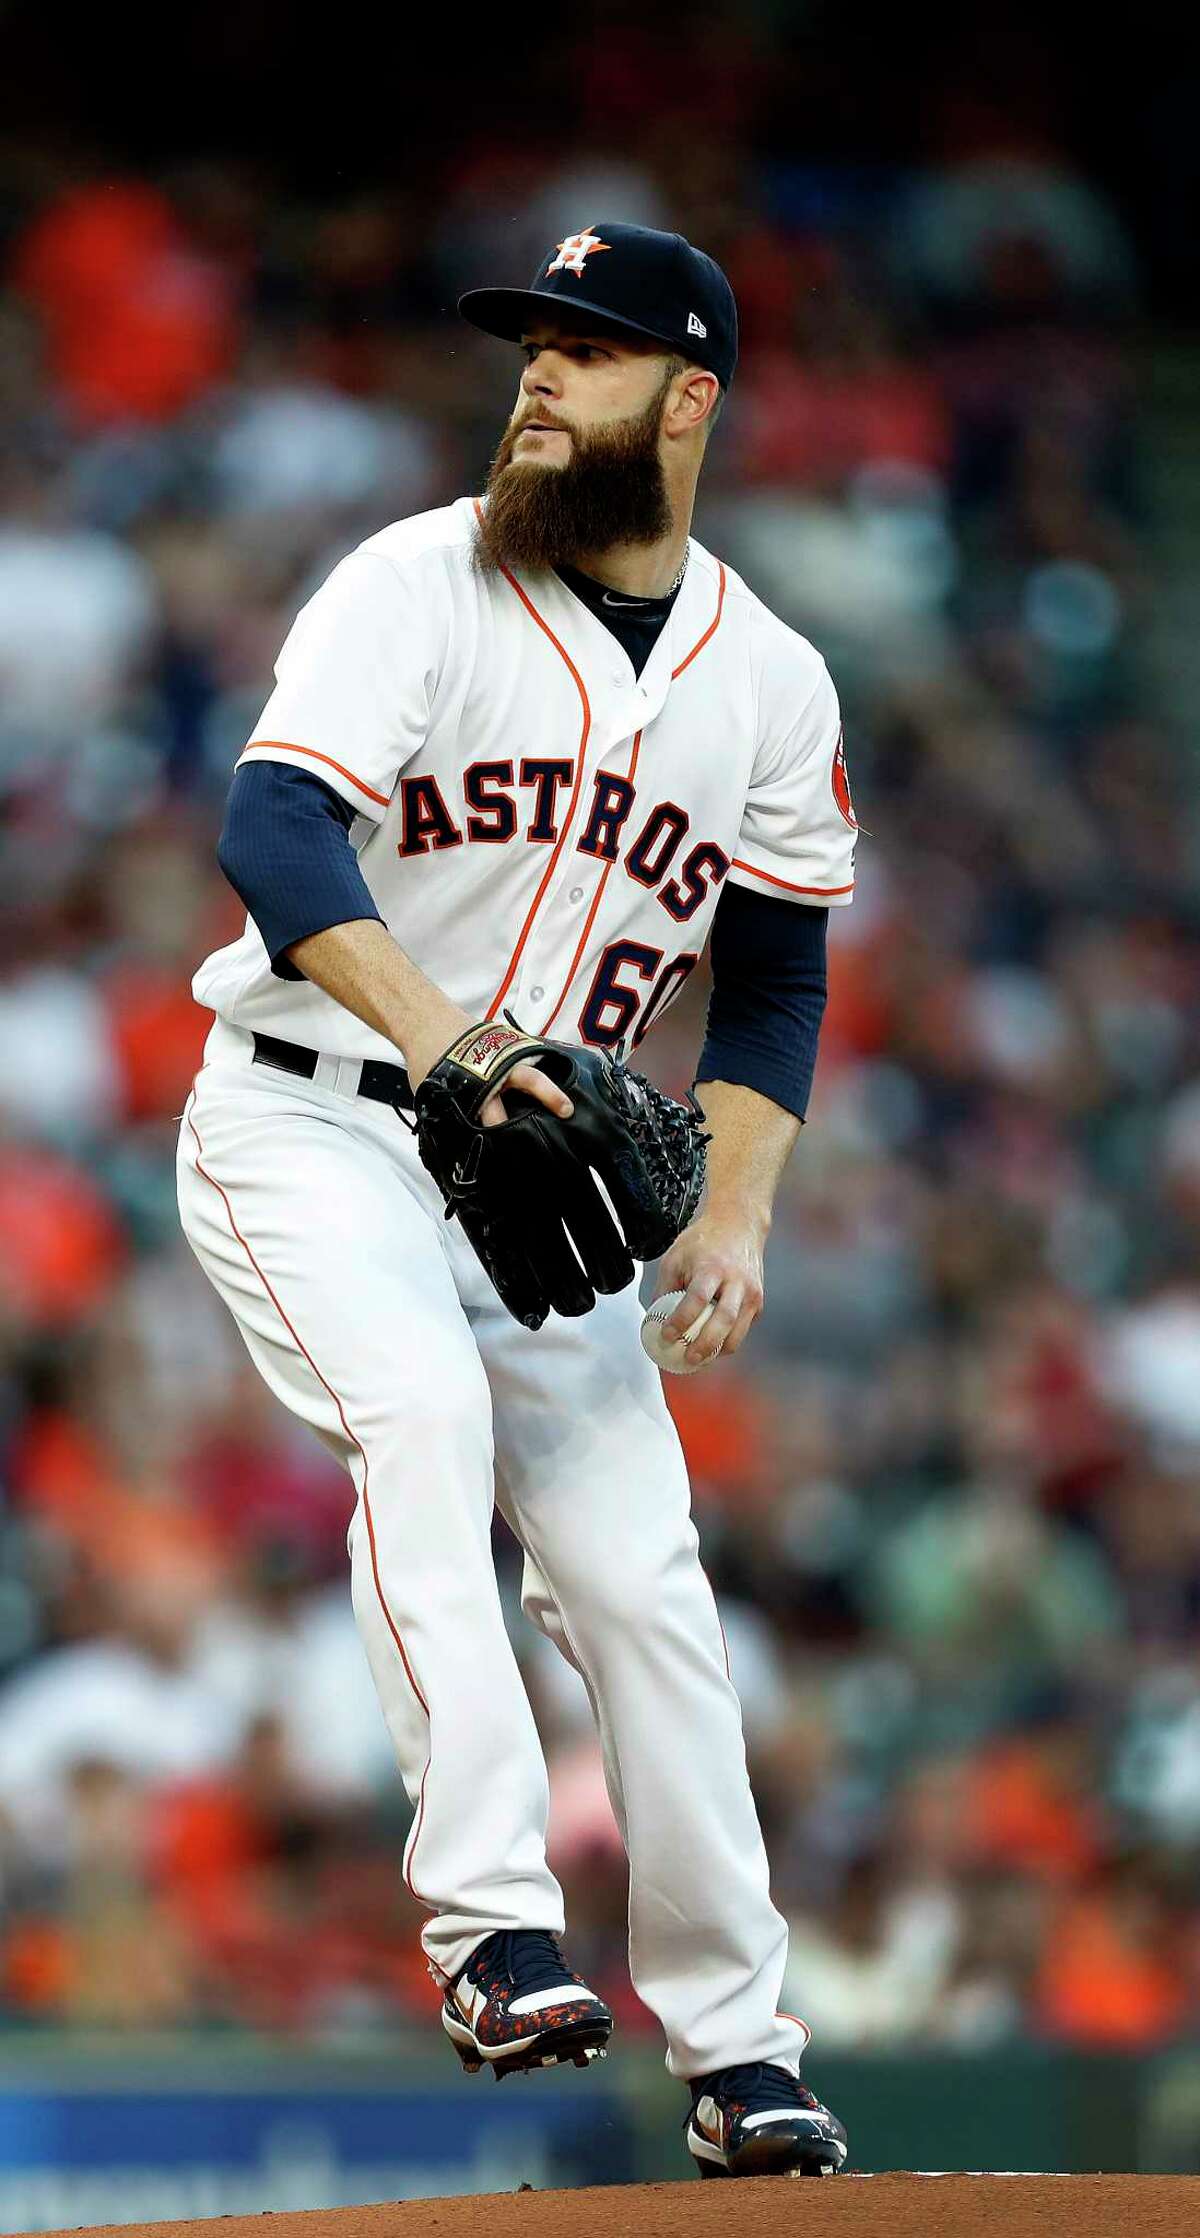 Houston Astros starting pitcher Dallas Keuchel (60) pitches in the first inning of the Houston Astros at Minute Maid Park, Friday, March 31, 2017, in Houston.